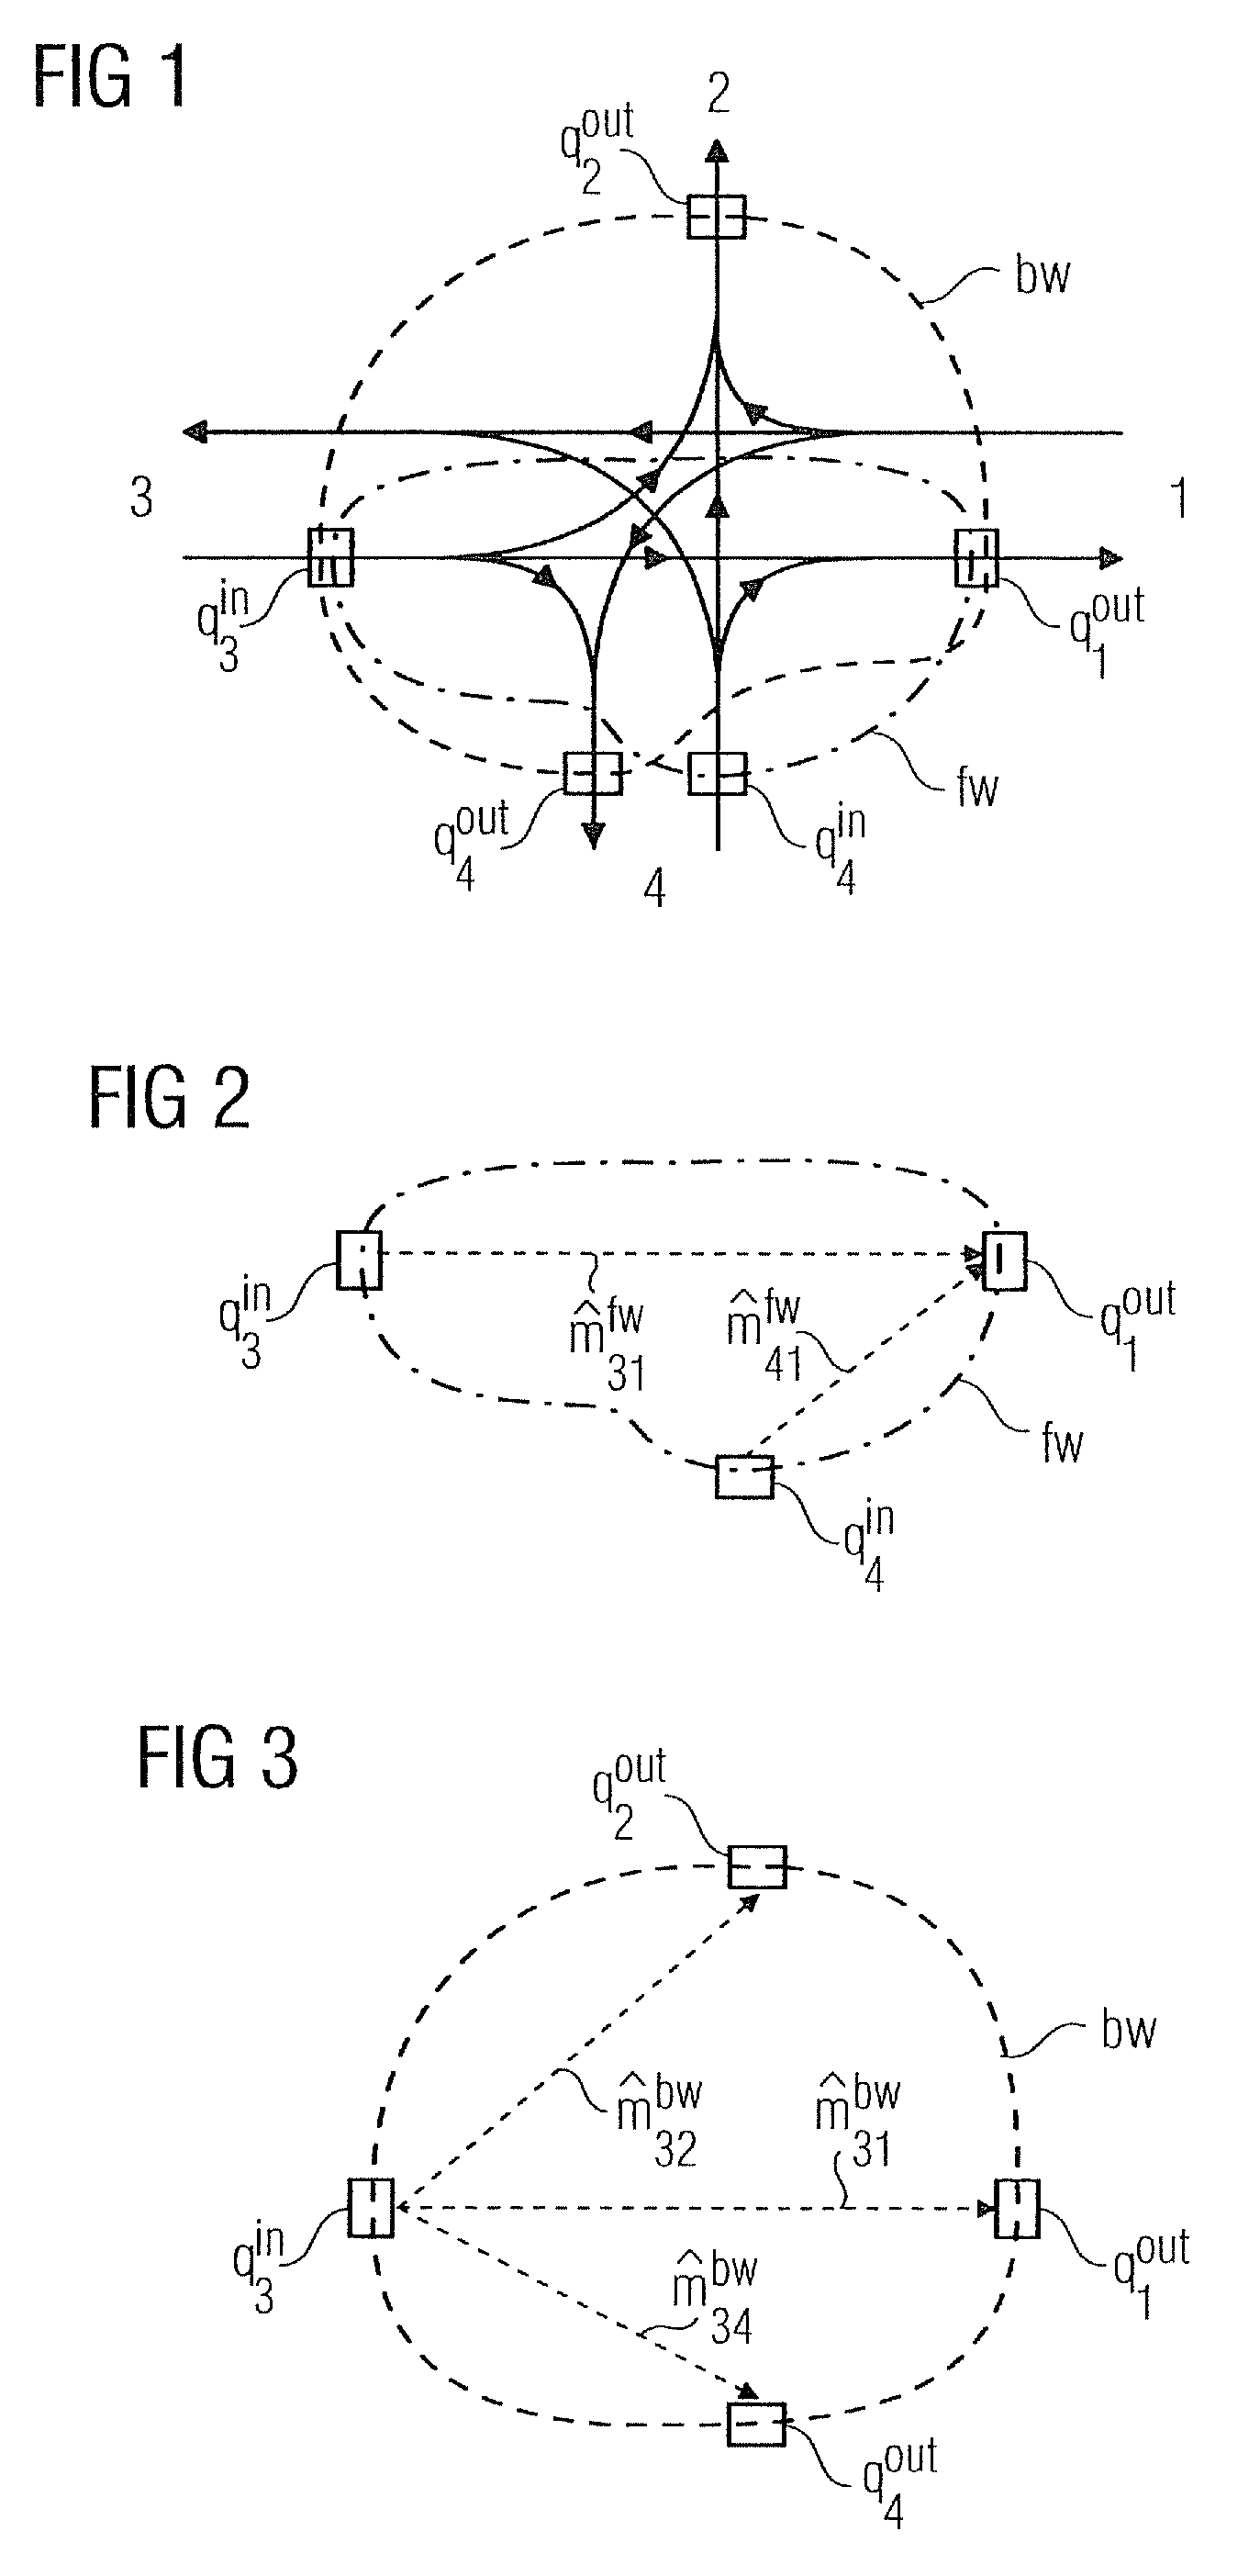 Methods for determining turning rates in a road network